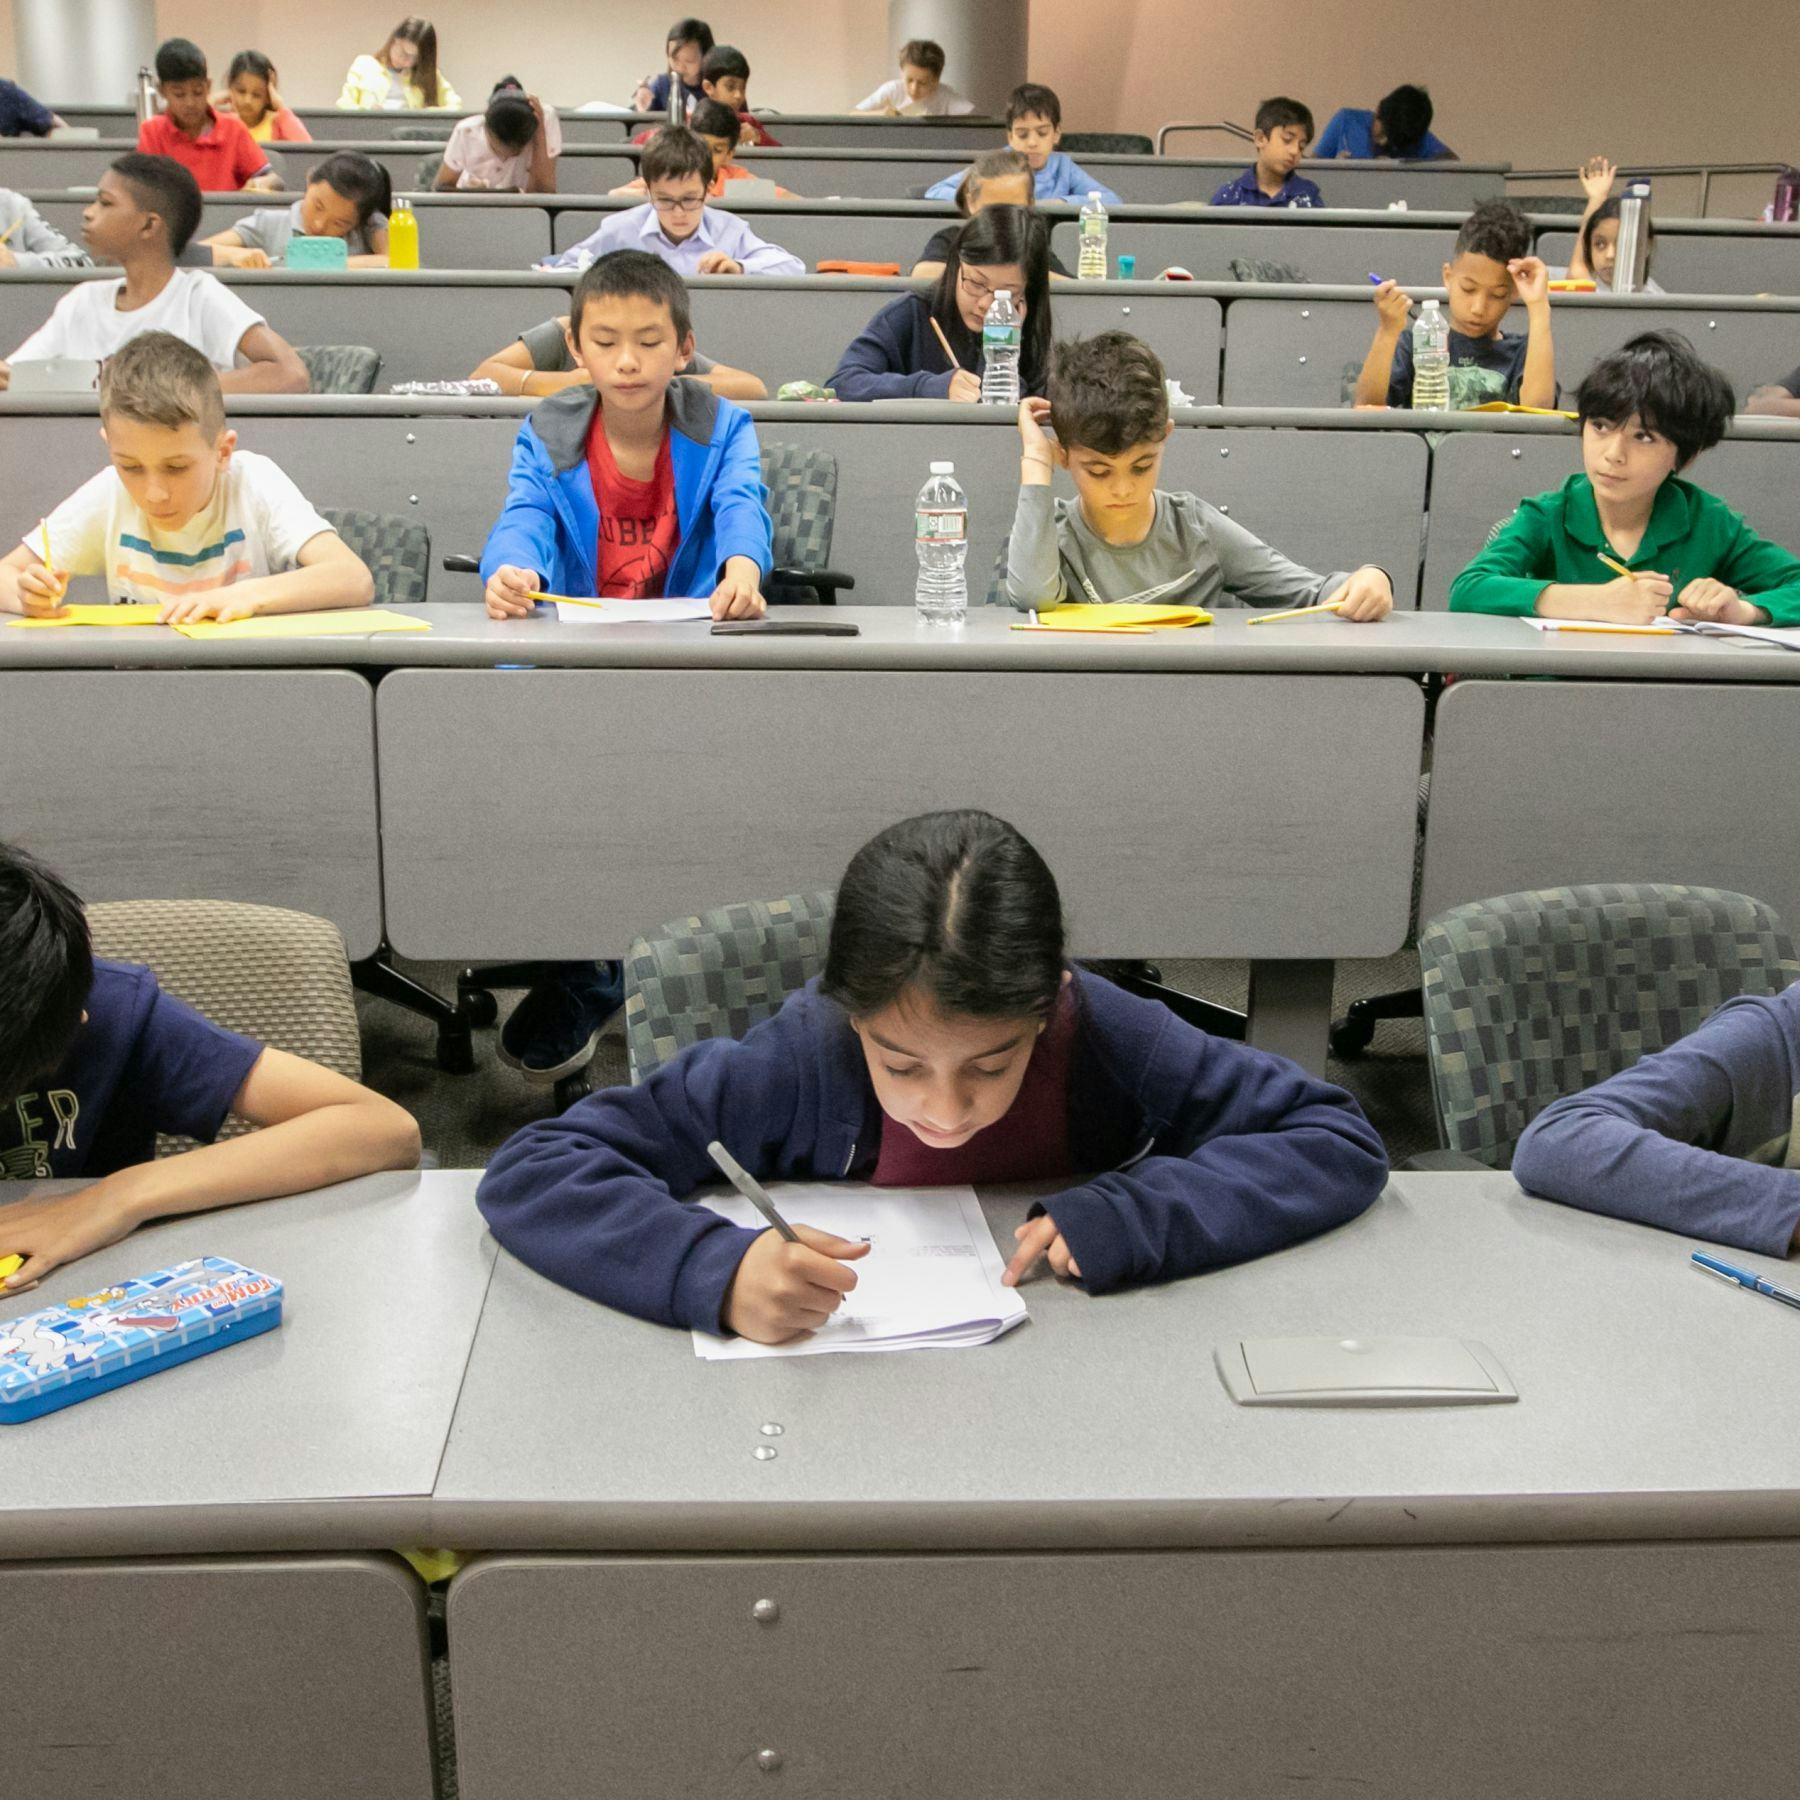 Students testing at the 2019 math olympiad